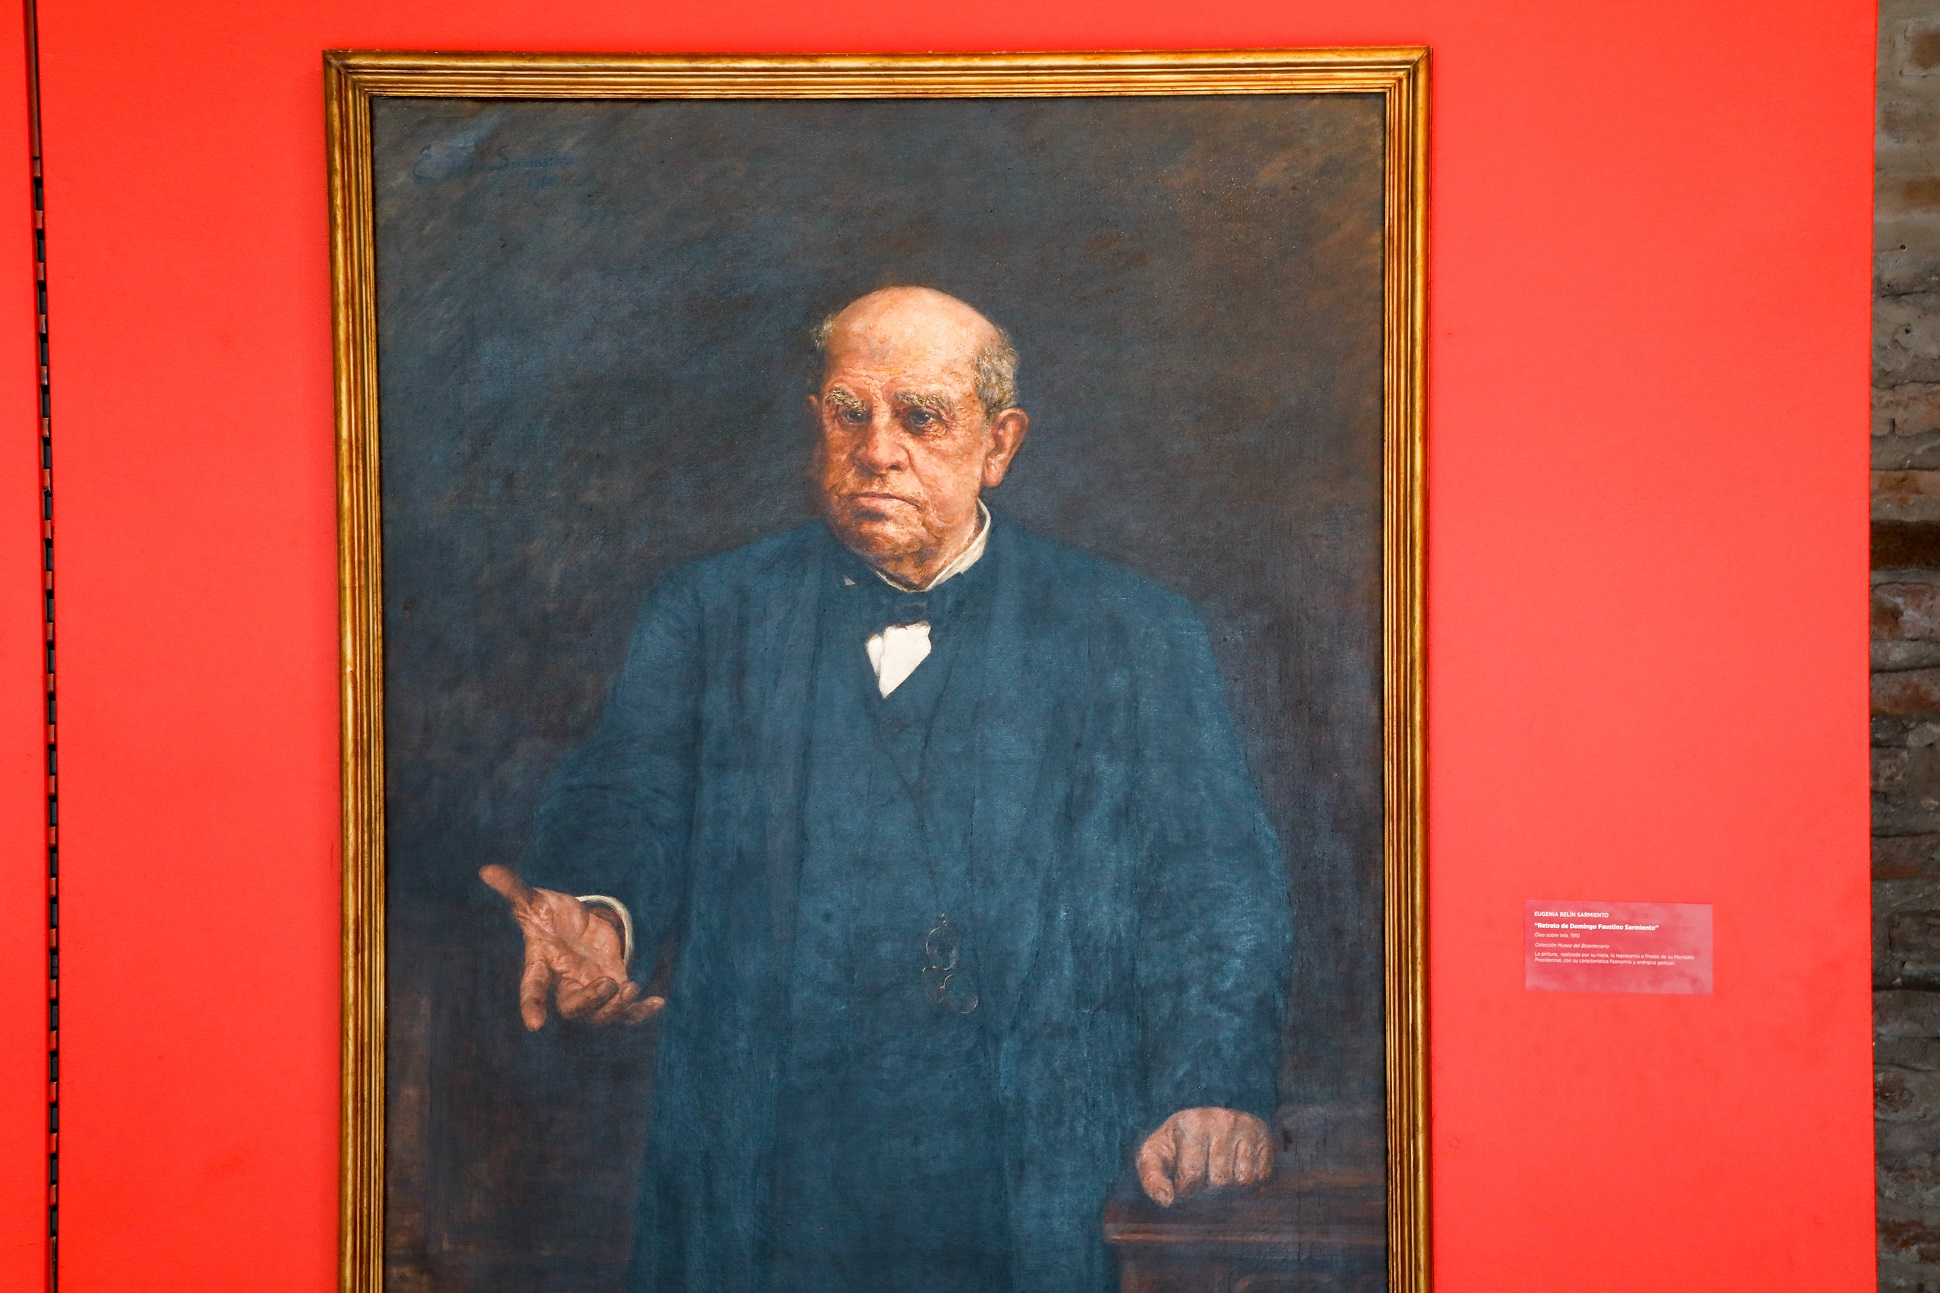 Eternal Legacy: 213th Anniversary of the Birth of Domingo Faustino Sarmiento